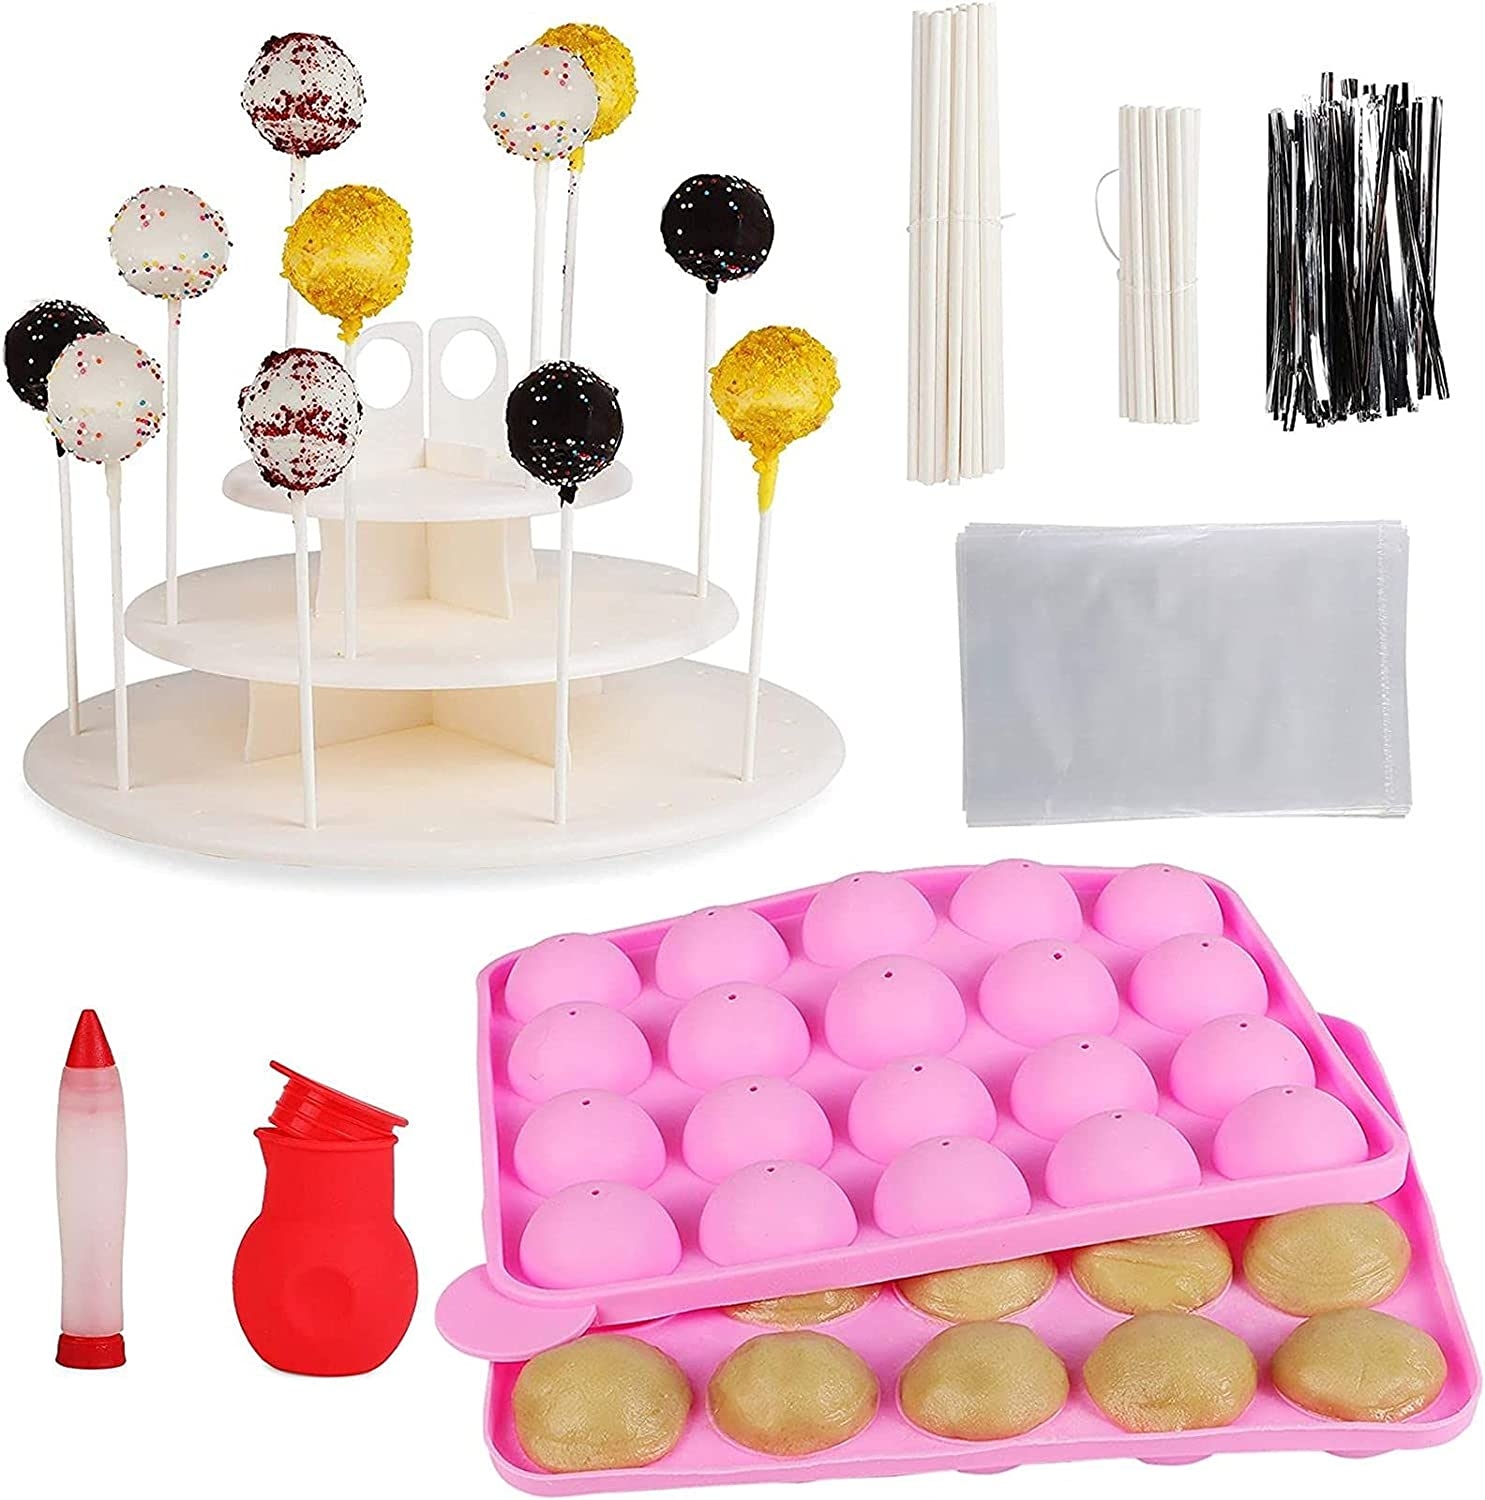 Cake Pop Maker Kit, Form, Stand, Cellophane Bags and Twist Ties (404 Pieces) Import To Shop ×Product customization General